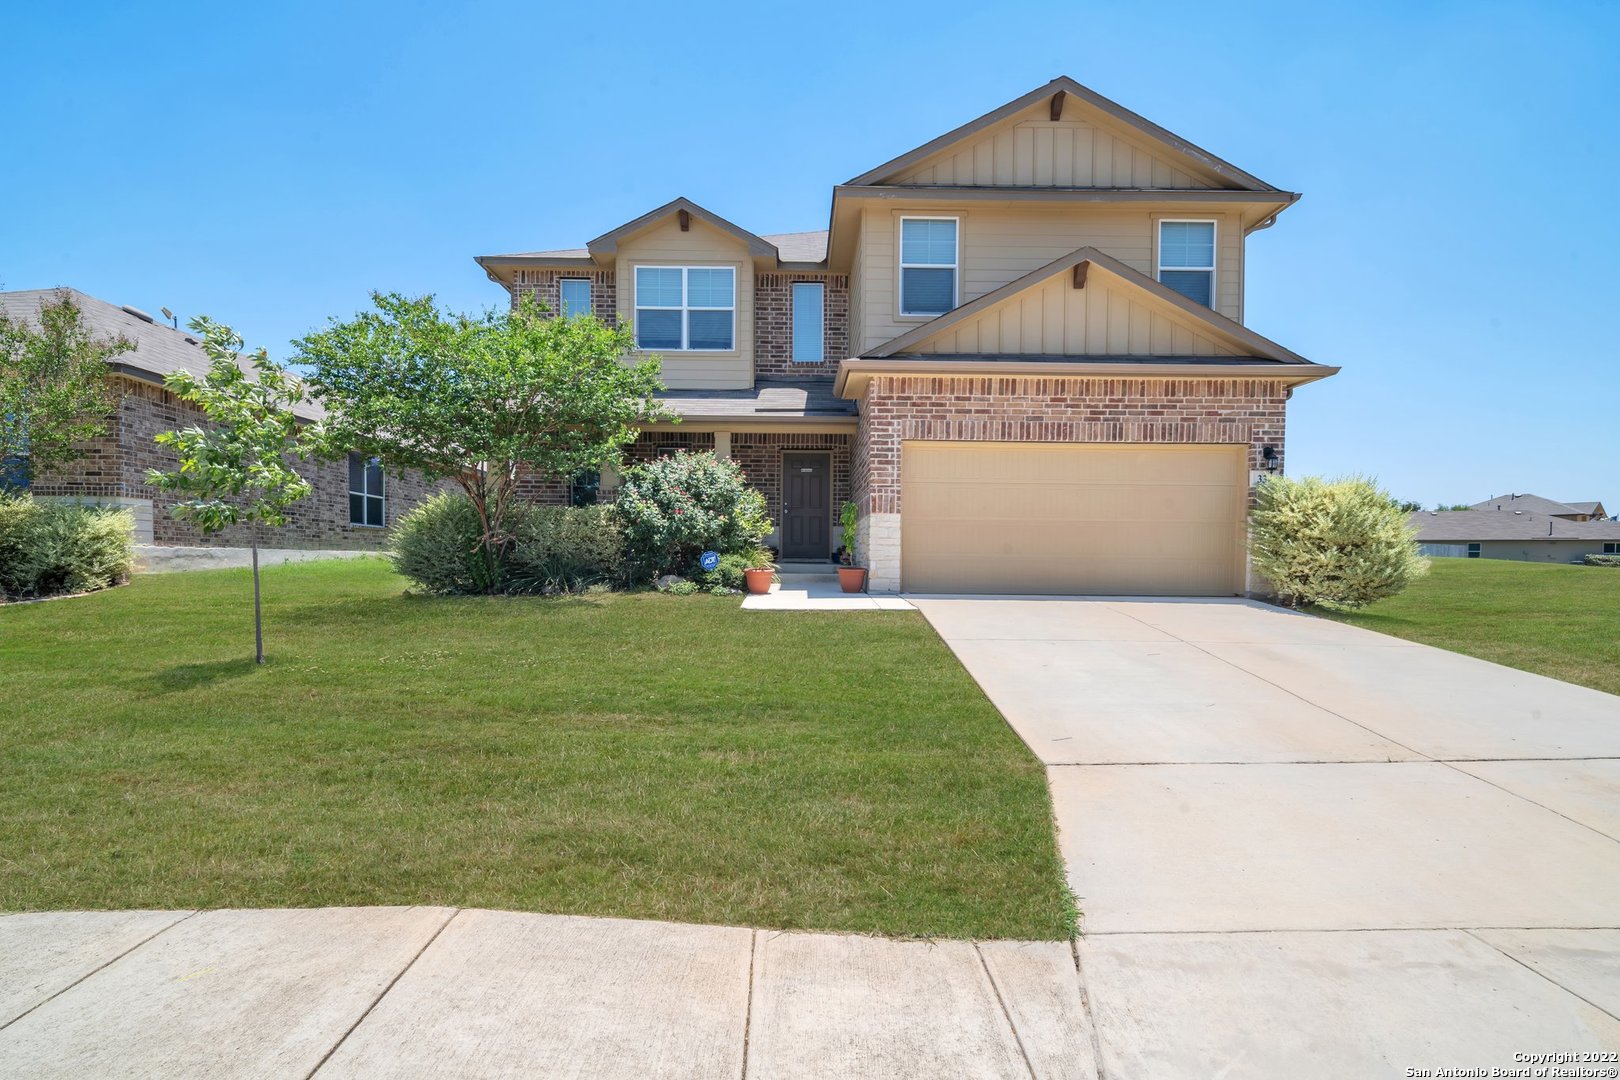 OPEN HOUSE this Saturday (11th) and Sunday (12th) 11am-3pm.  Beautiful and Spacious home in the sought after RedBird Ranch Community.  Sitting at a stunning 3,512 square feet, this HUGE two story home features 6 bedrooms and 3.5 baths.    Upon entering the home, you will love the large island kitchen featuring granite countertops, upgraded cabinets and ceramic tile floors, dining area and adjoining living area. Owner's Suite is located on the main floor right off of the living room with adjoining master bath that features dual walk in closets, garden tub, separate shower and double vanities.    The top floor highlights a huge game room that includes a pool table that will convey if requested. A second oversized bedroom with walk in closet and full bath are located directly next to the game room.  Four additional large rooms with almost all including walk in closets are also included on the top floor with a neighboring full size bathroom.    Don't miss your chance to own this home that includes all the space you could ever dream of!  Neighborhood amenities include access to pool, tennis courts, clubhouse, playground, jogging/bike trails and a sports court.  Community is located just a short drive to local shopping, restaurants and major employers such as Lackland AFB, BOEING and Southwest Research Institute.    Showings begin Friday, 6/10 2pm.    * Pool Table, 4 Overhead Storage in garage, All TV mounts, Microwave, Stove, Entry Shelf, and Blinds Convey*    *Fridge, Washer, Dryer, and Safe do not convey*